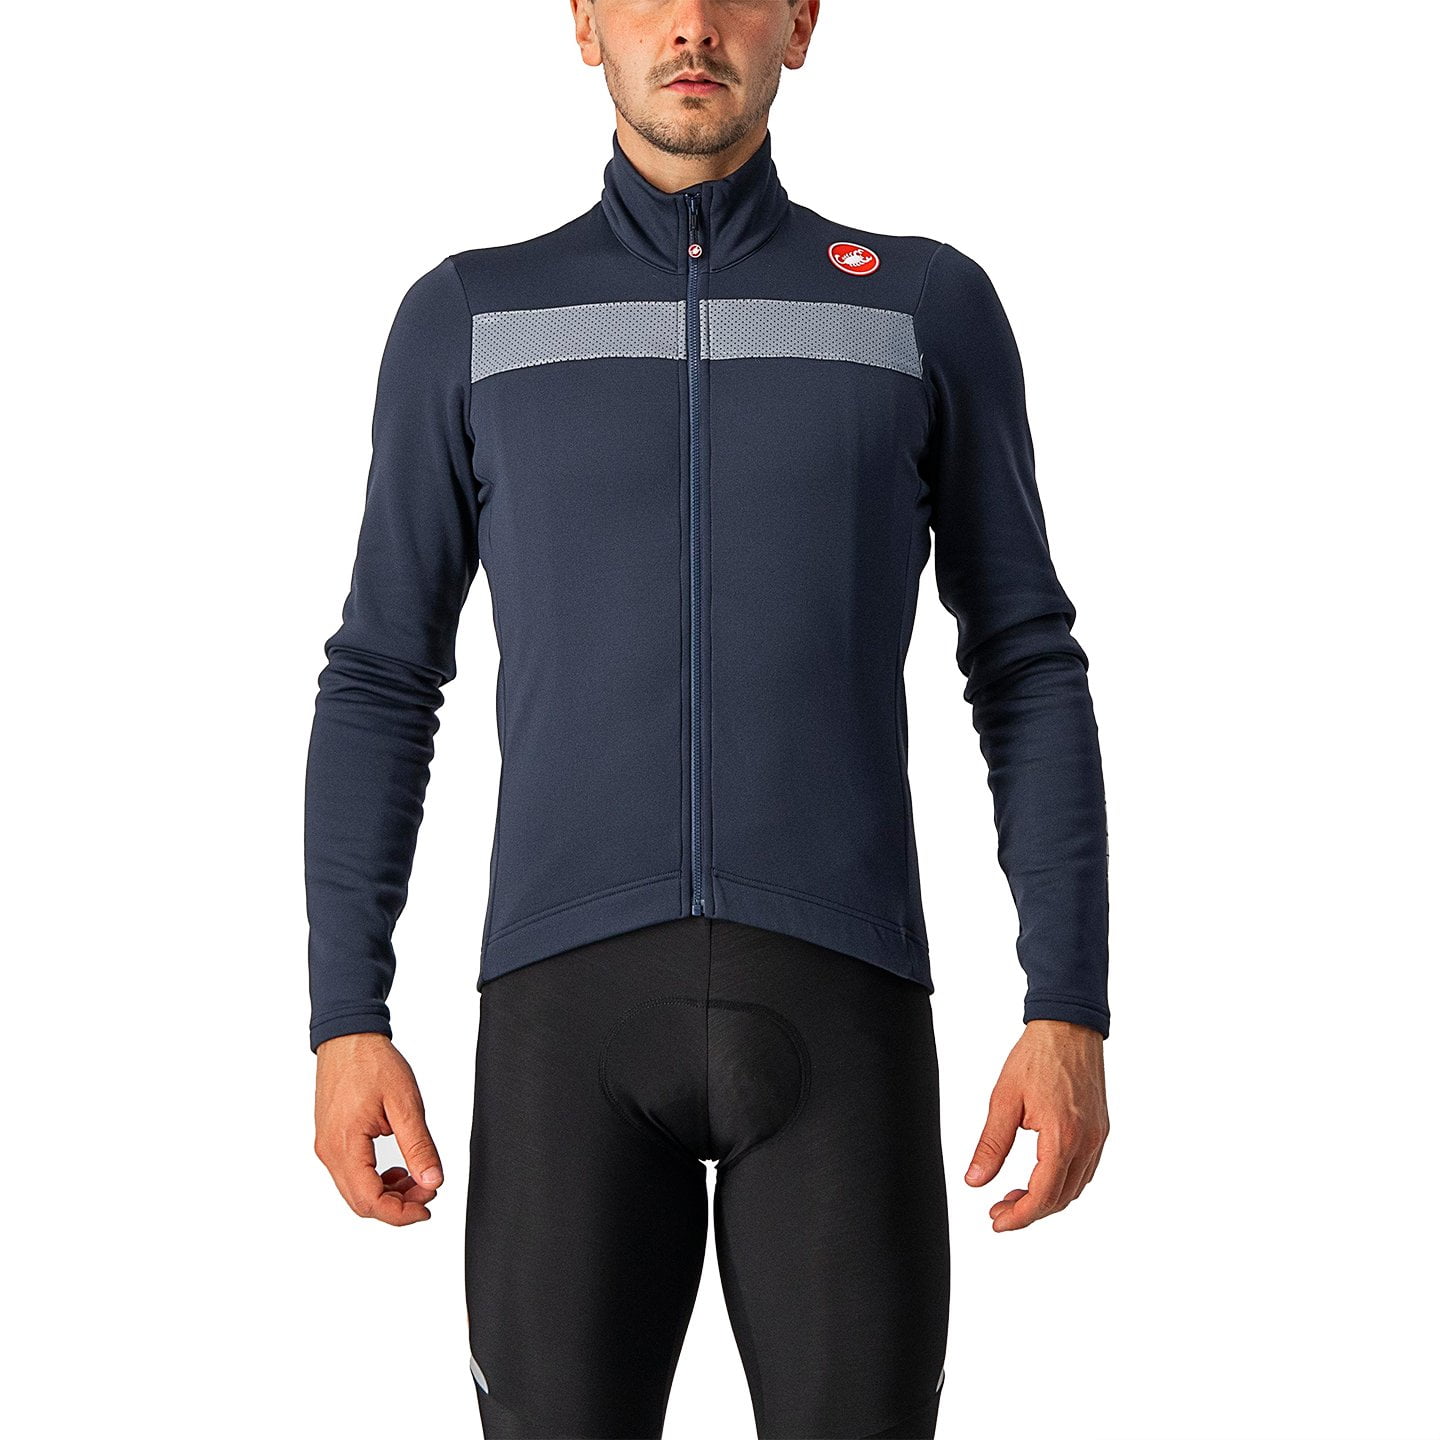 CASTELLI Puro 3 Long Sleeve Jersey Long Sleeve Jersey, for men, size M, Cycling jersey, Cycling clothing